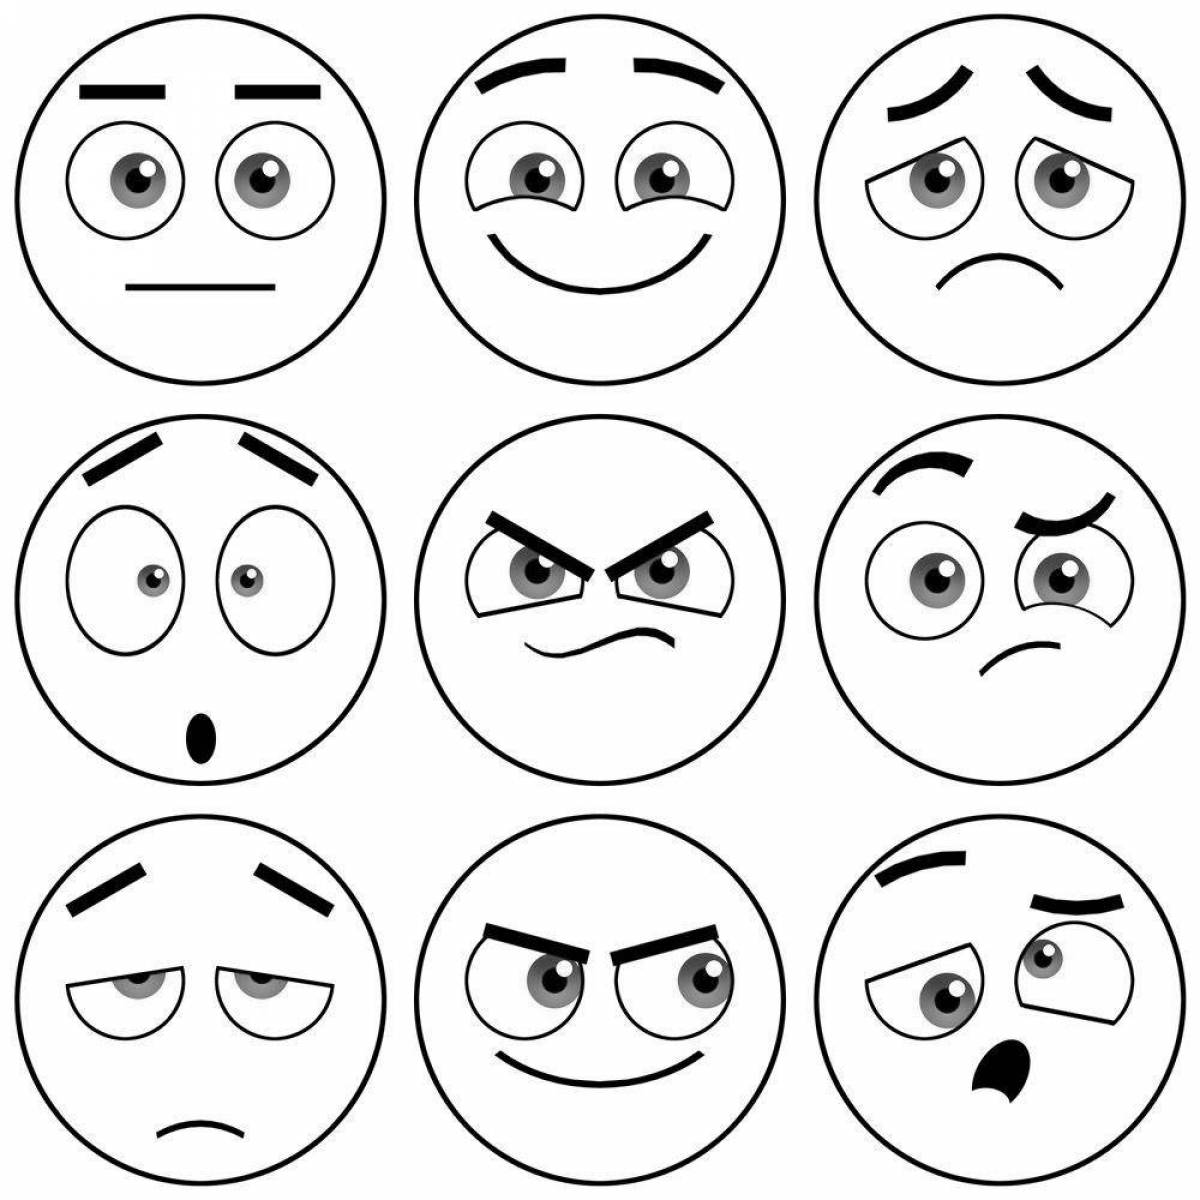 Fun coloring pages of emotions